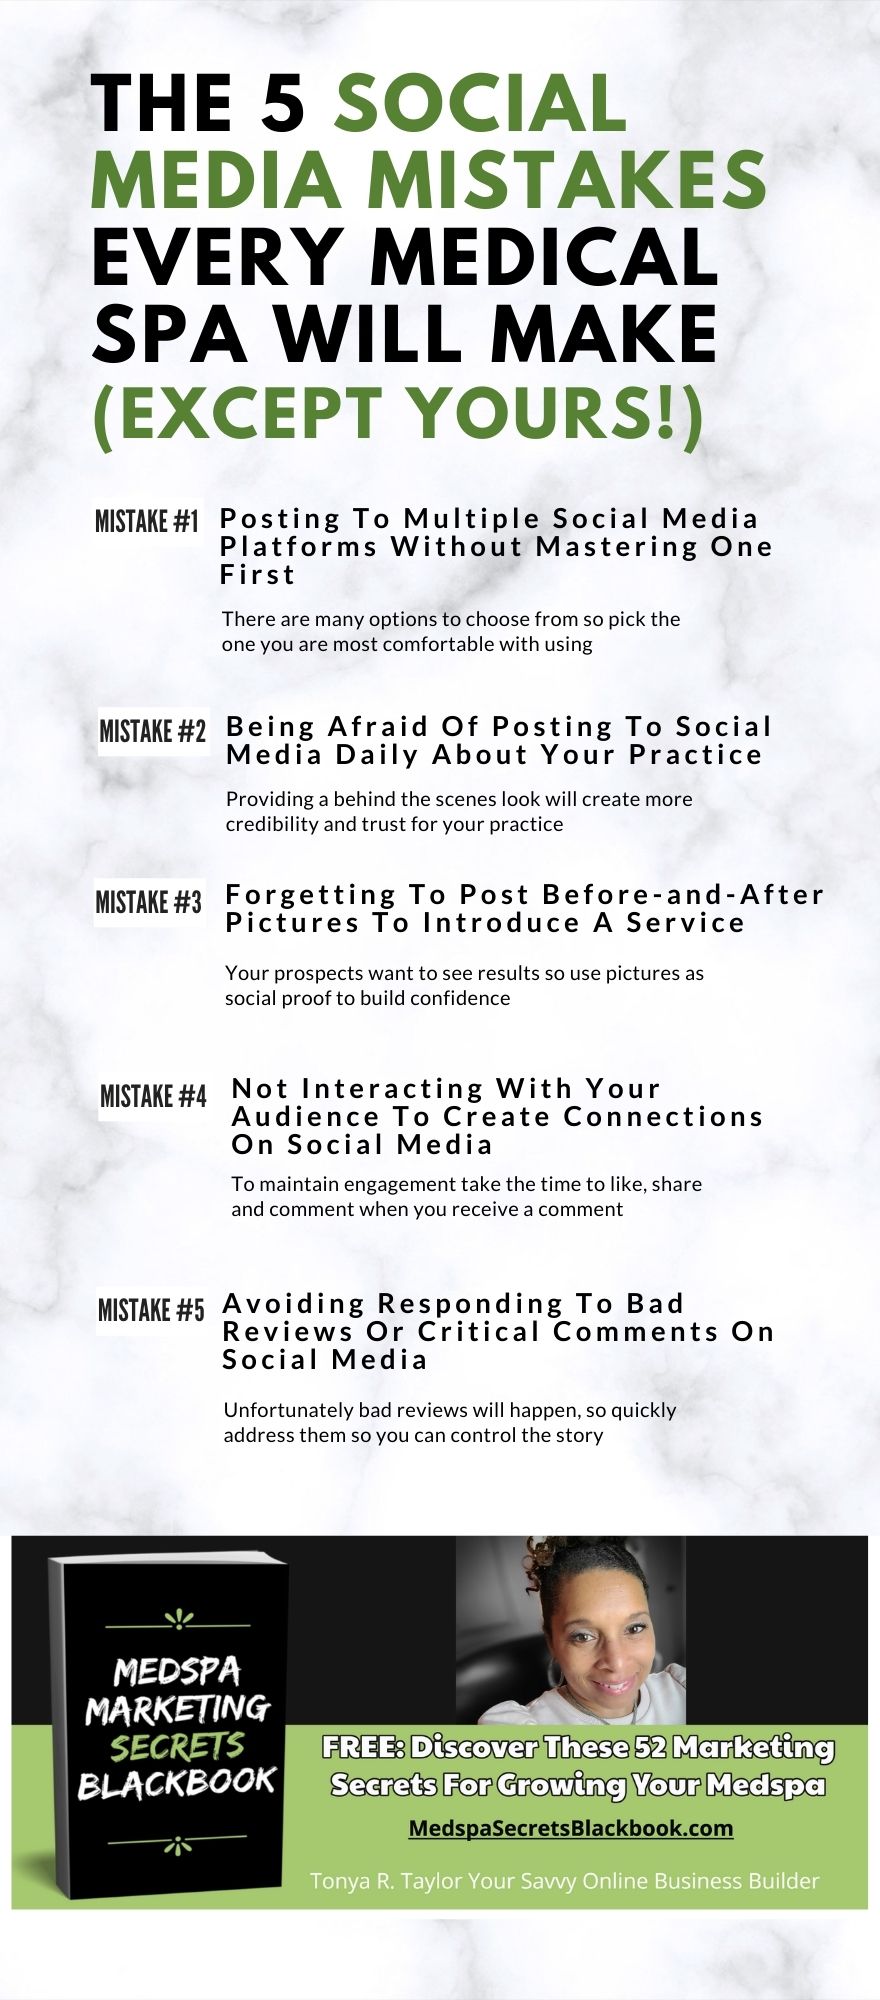 Medical Spa Infographic - The 5 Social Media Mistakes Every Medical Spa Will Make (Except Yours!)